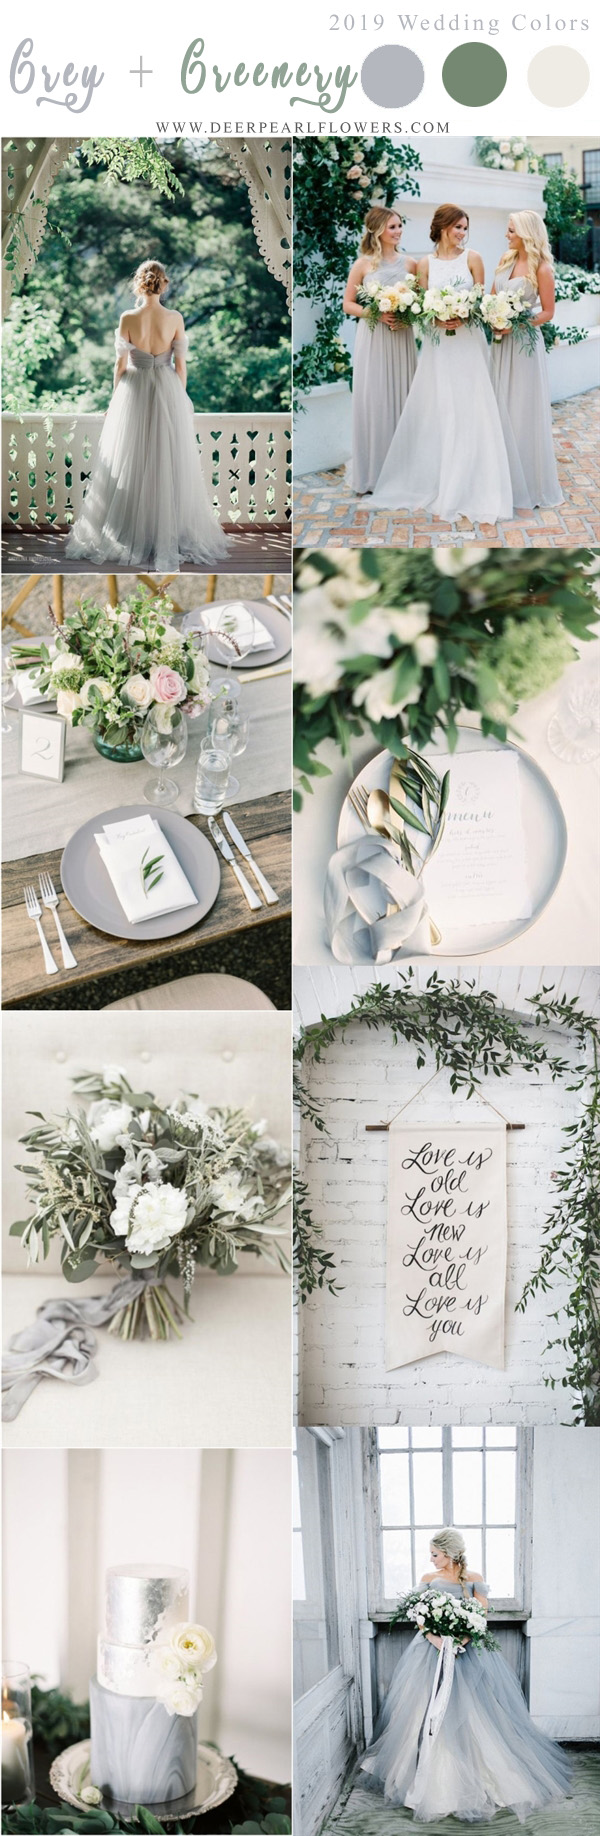 chic grey and greenery wedding color ideas